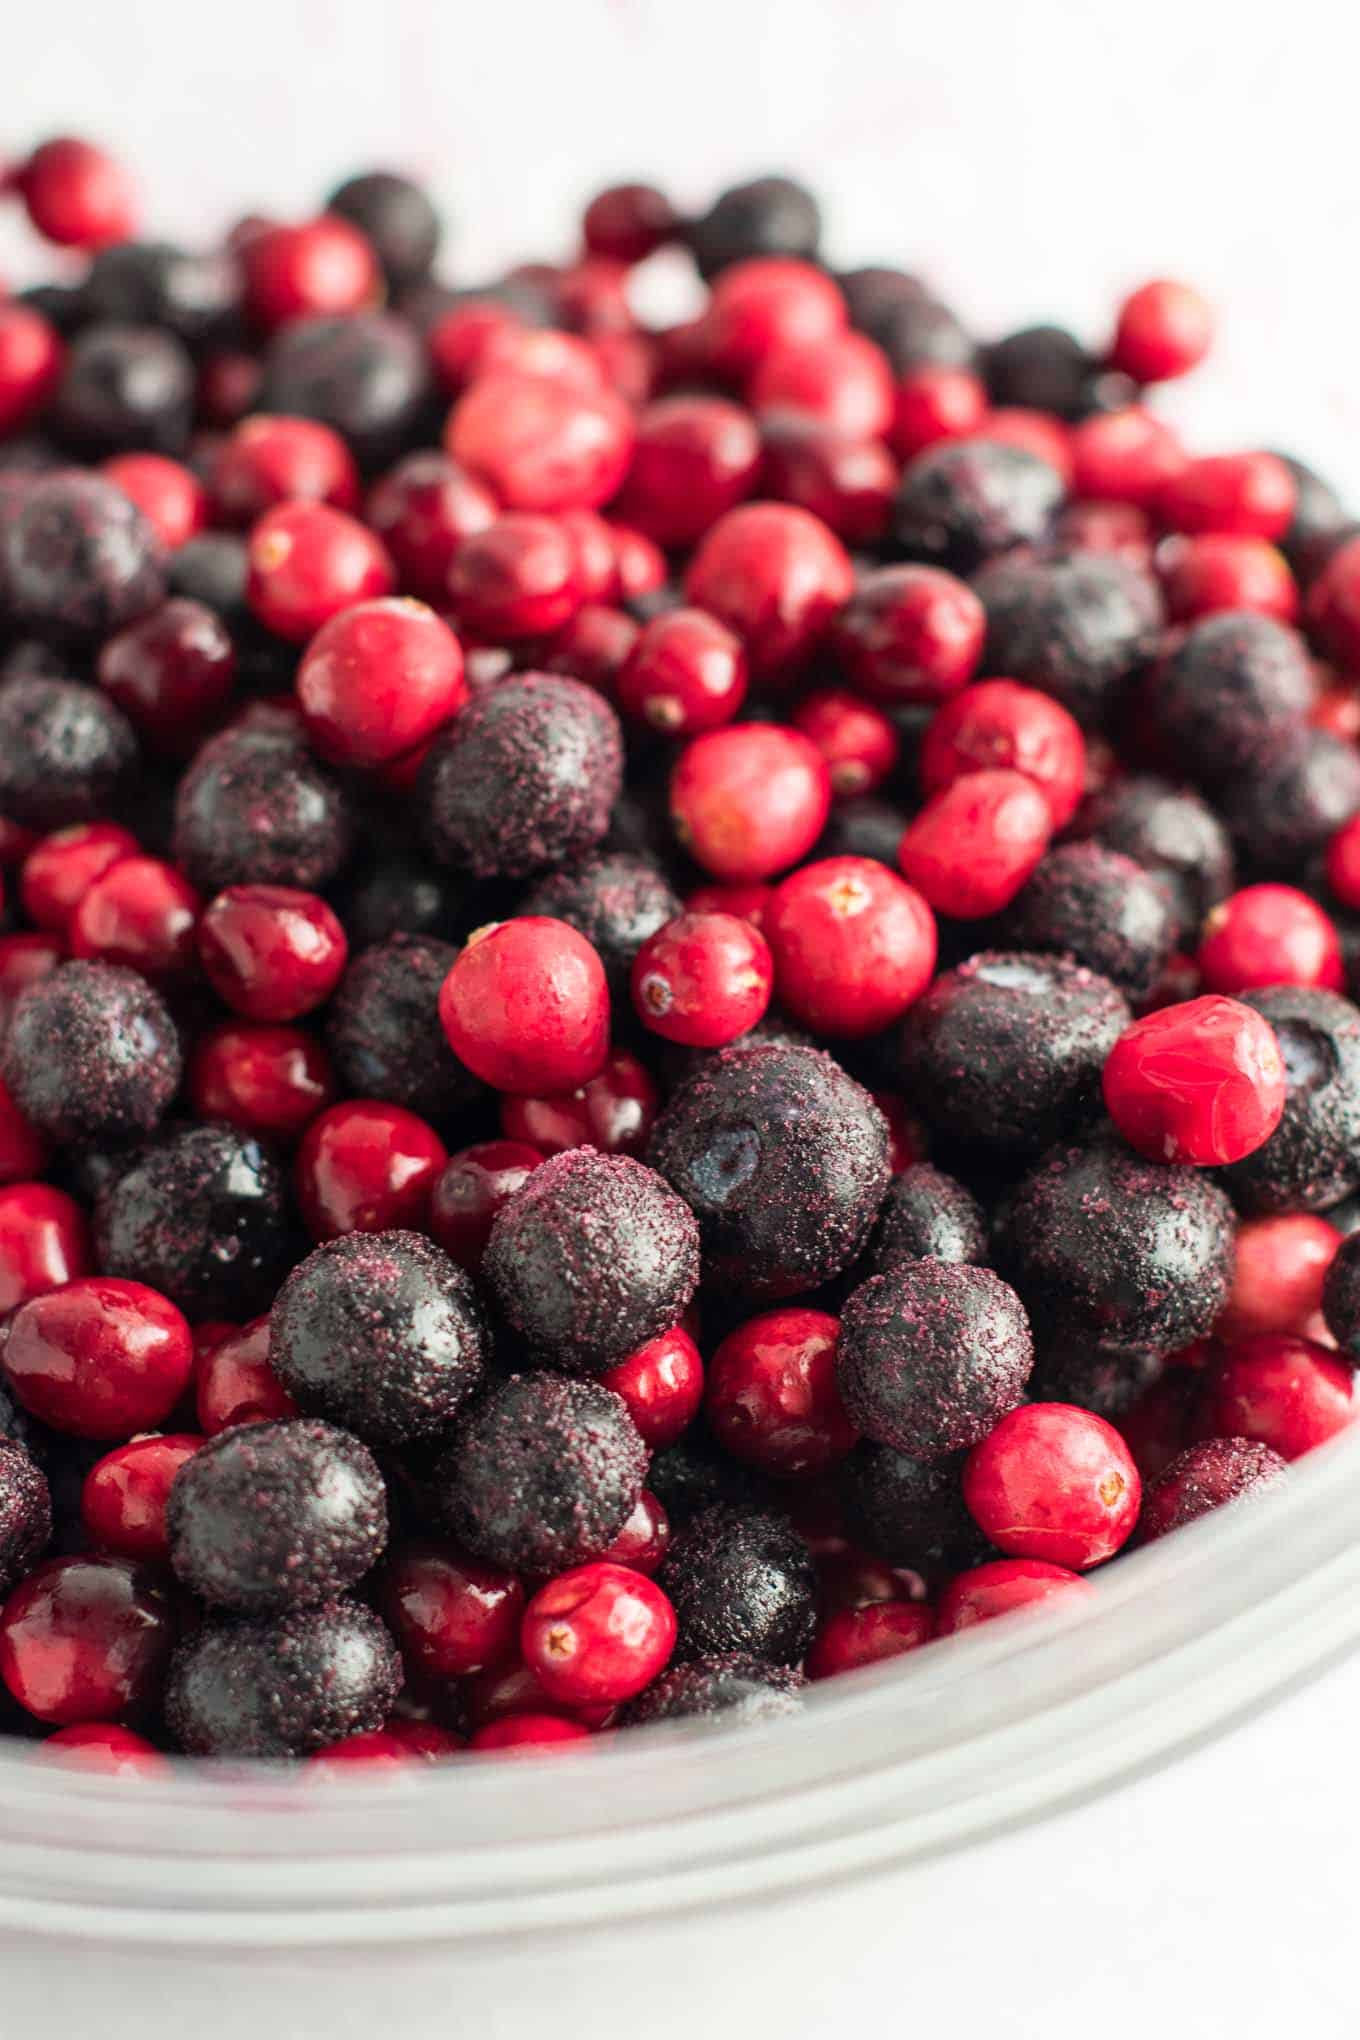 frozen blueberries and fresh cranberries mixed together